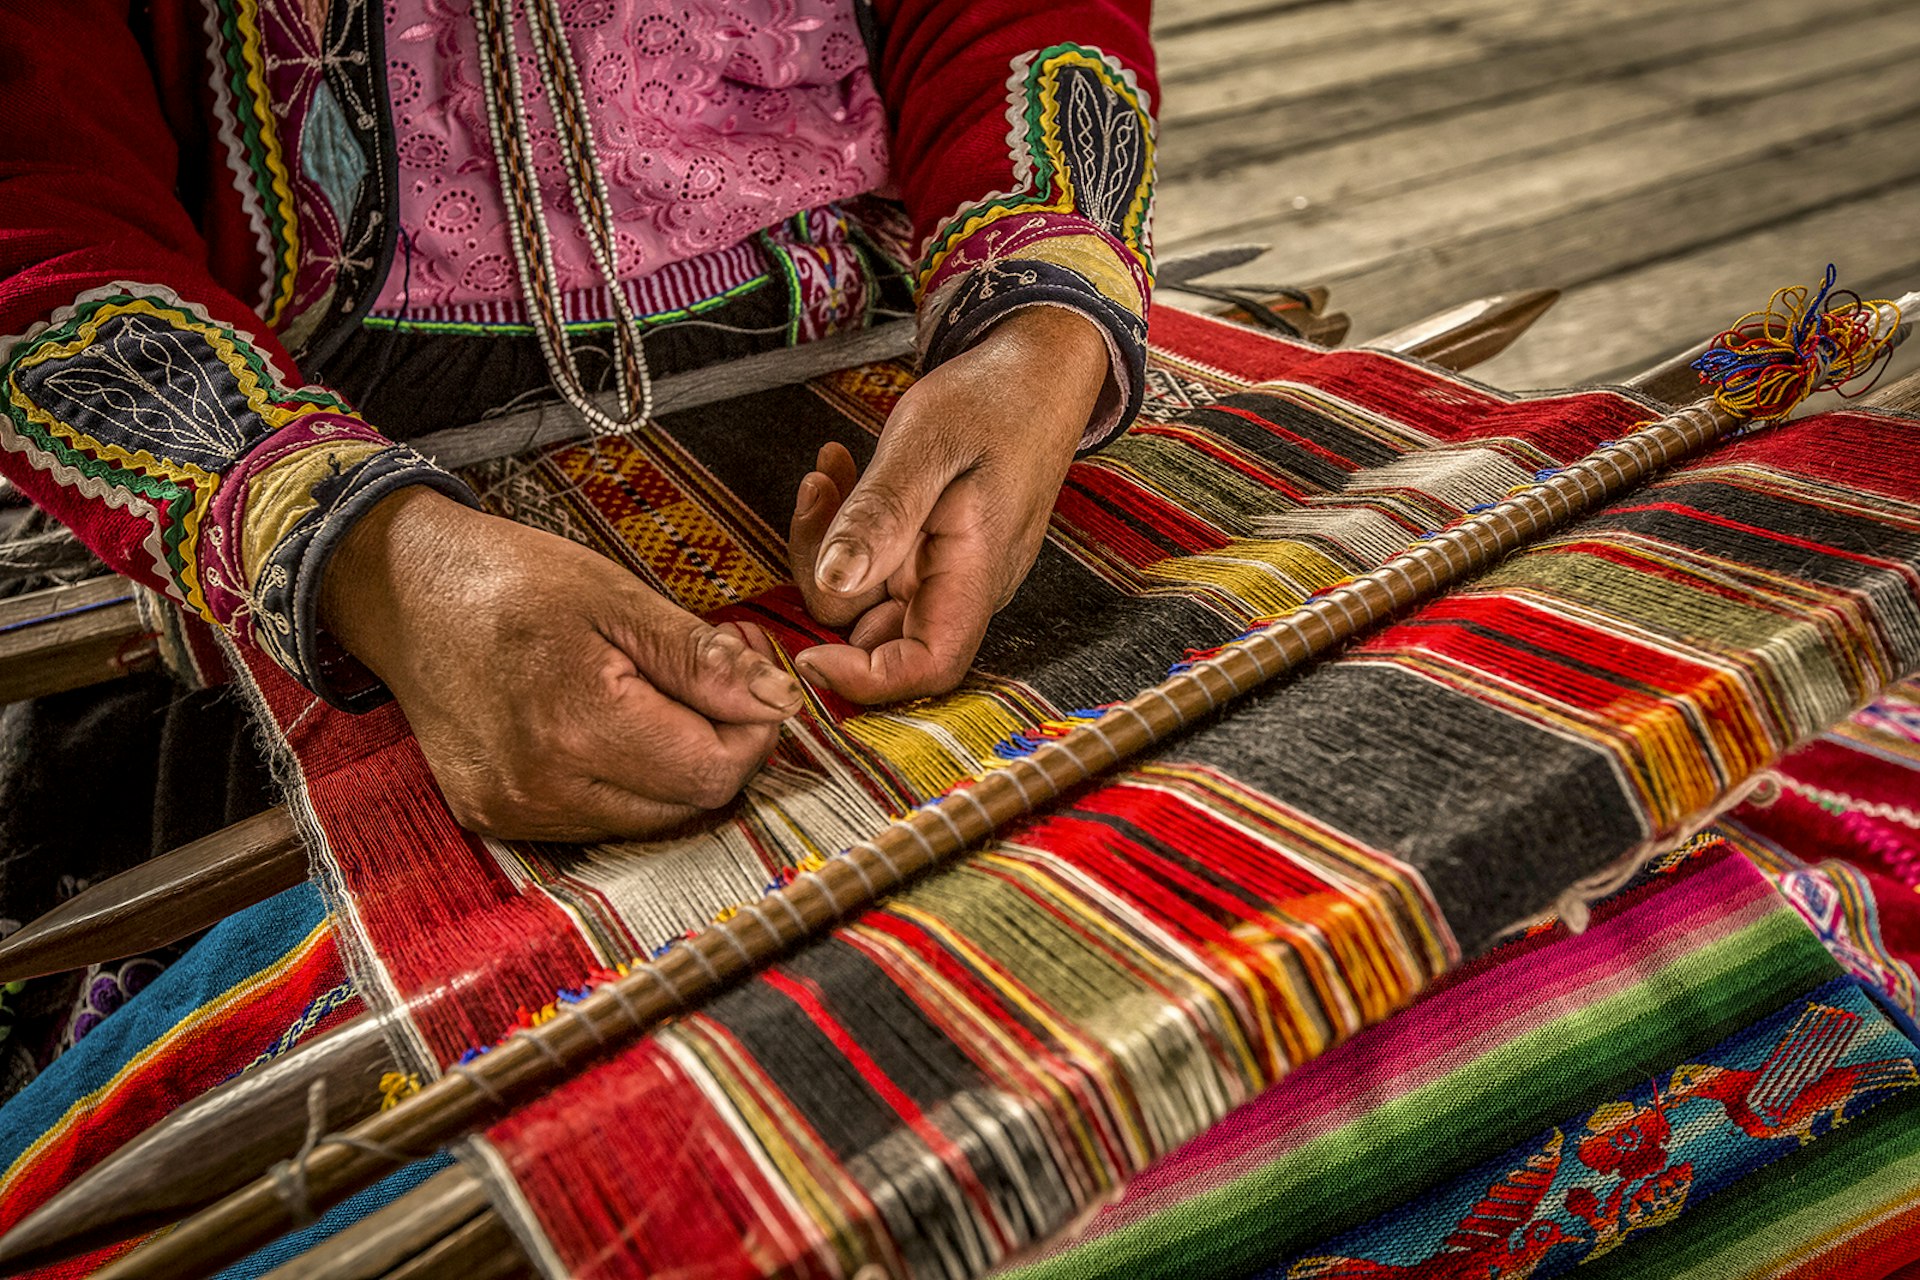 Closeup of woman's hands as she weaves blanket in Peru